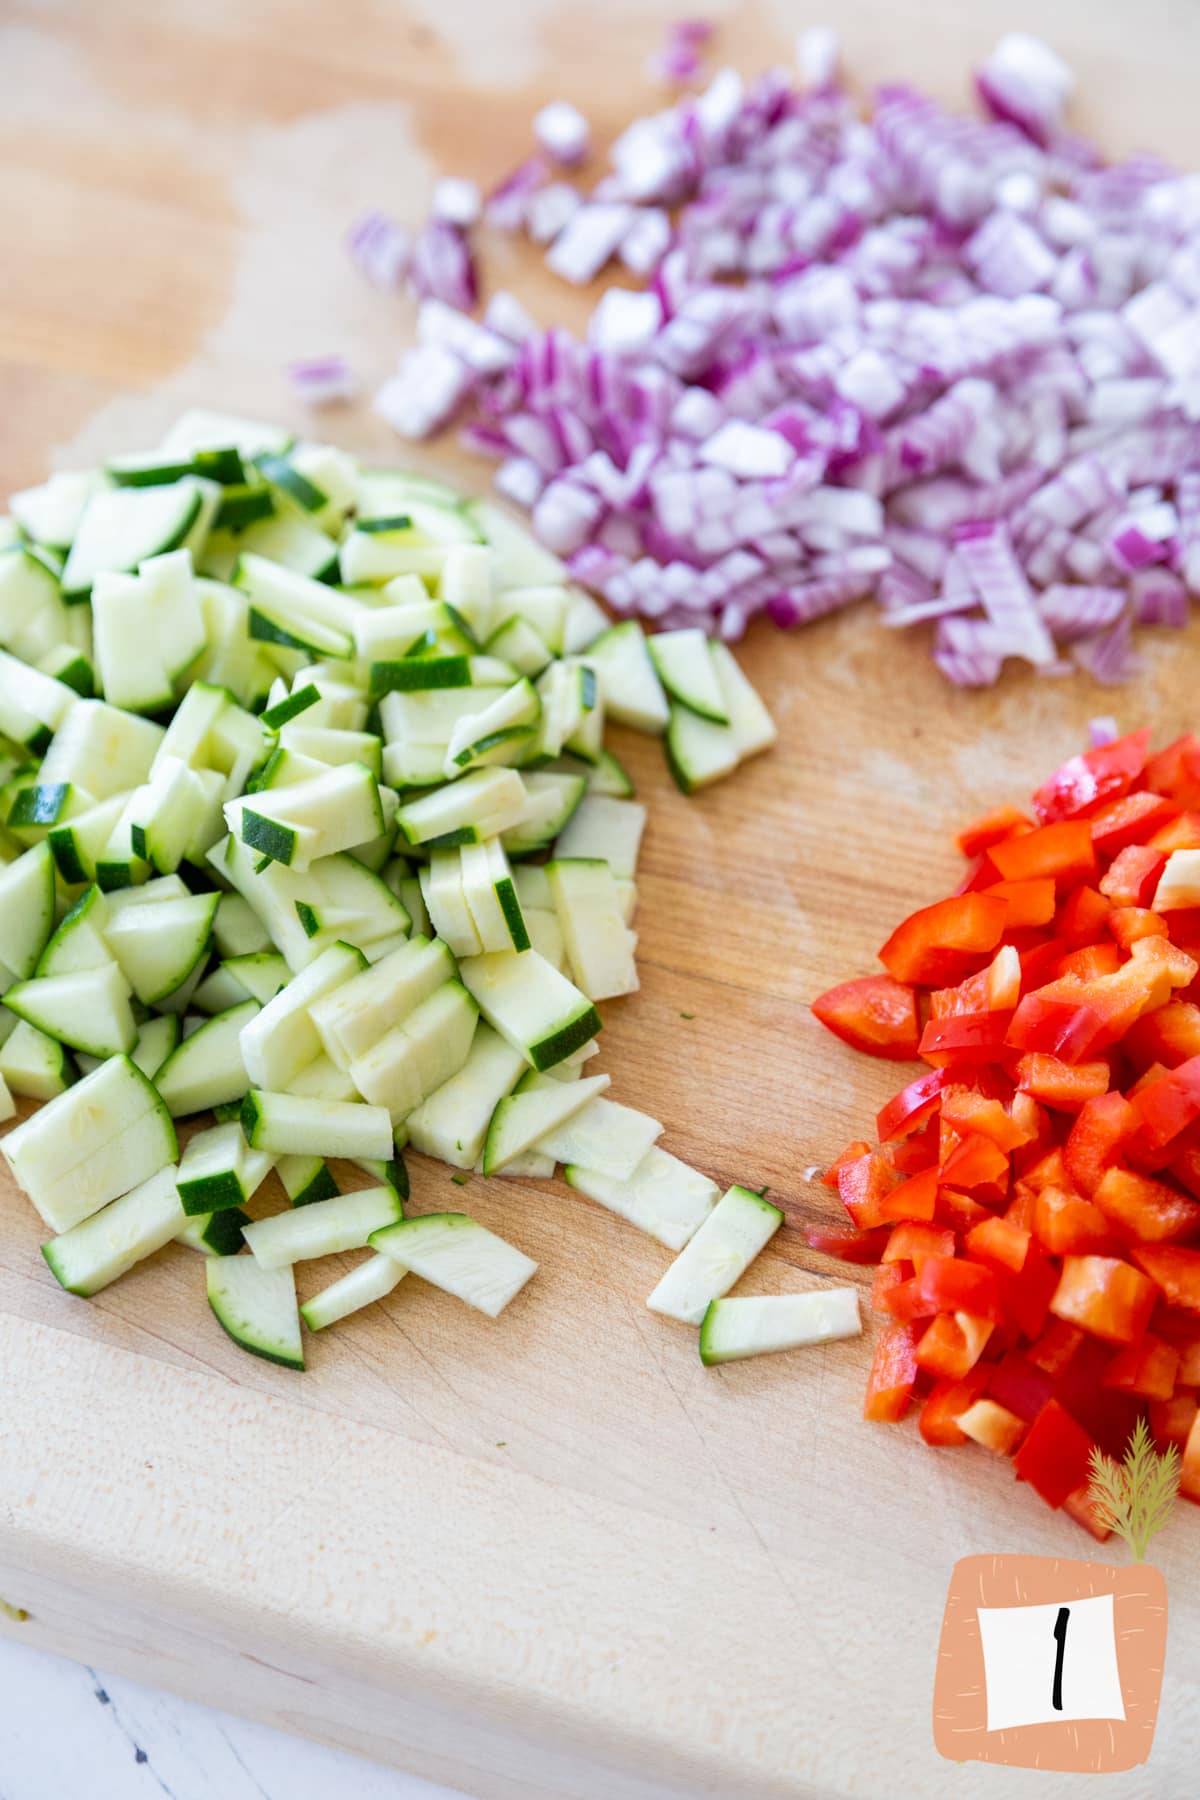 A wooden cutting board with diced red bell pepper, red onion, and zucchini.